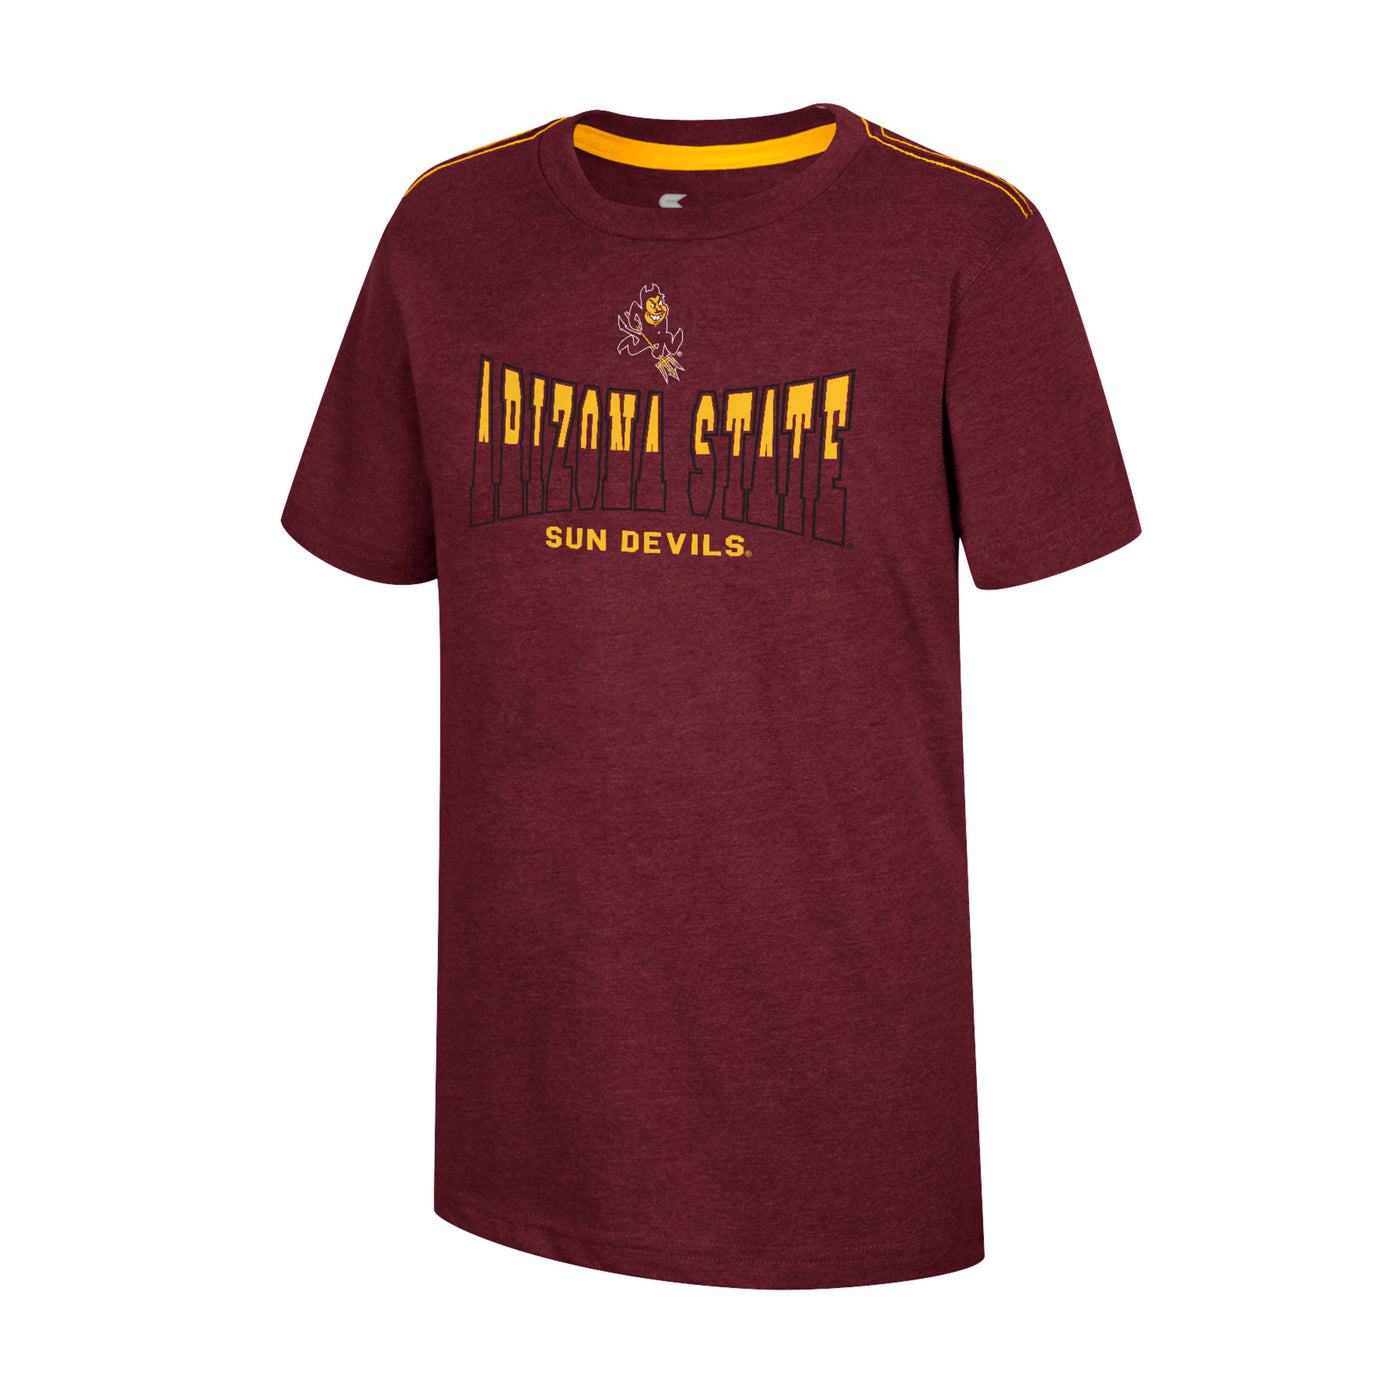 ASU maroon youth shirt with the text 